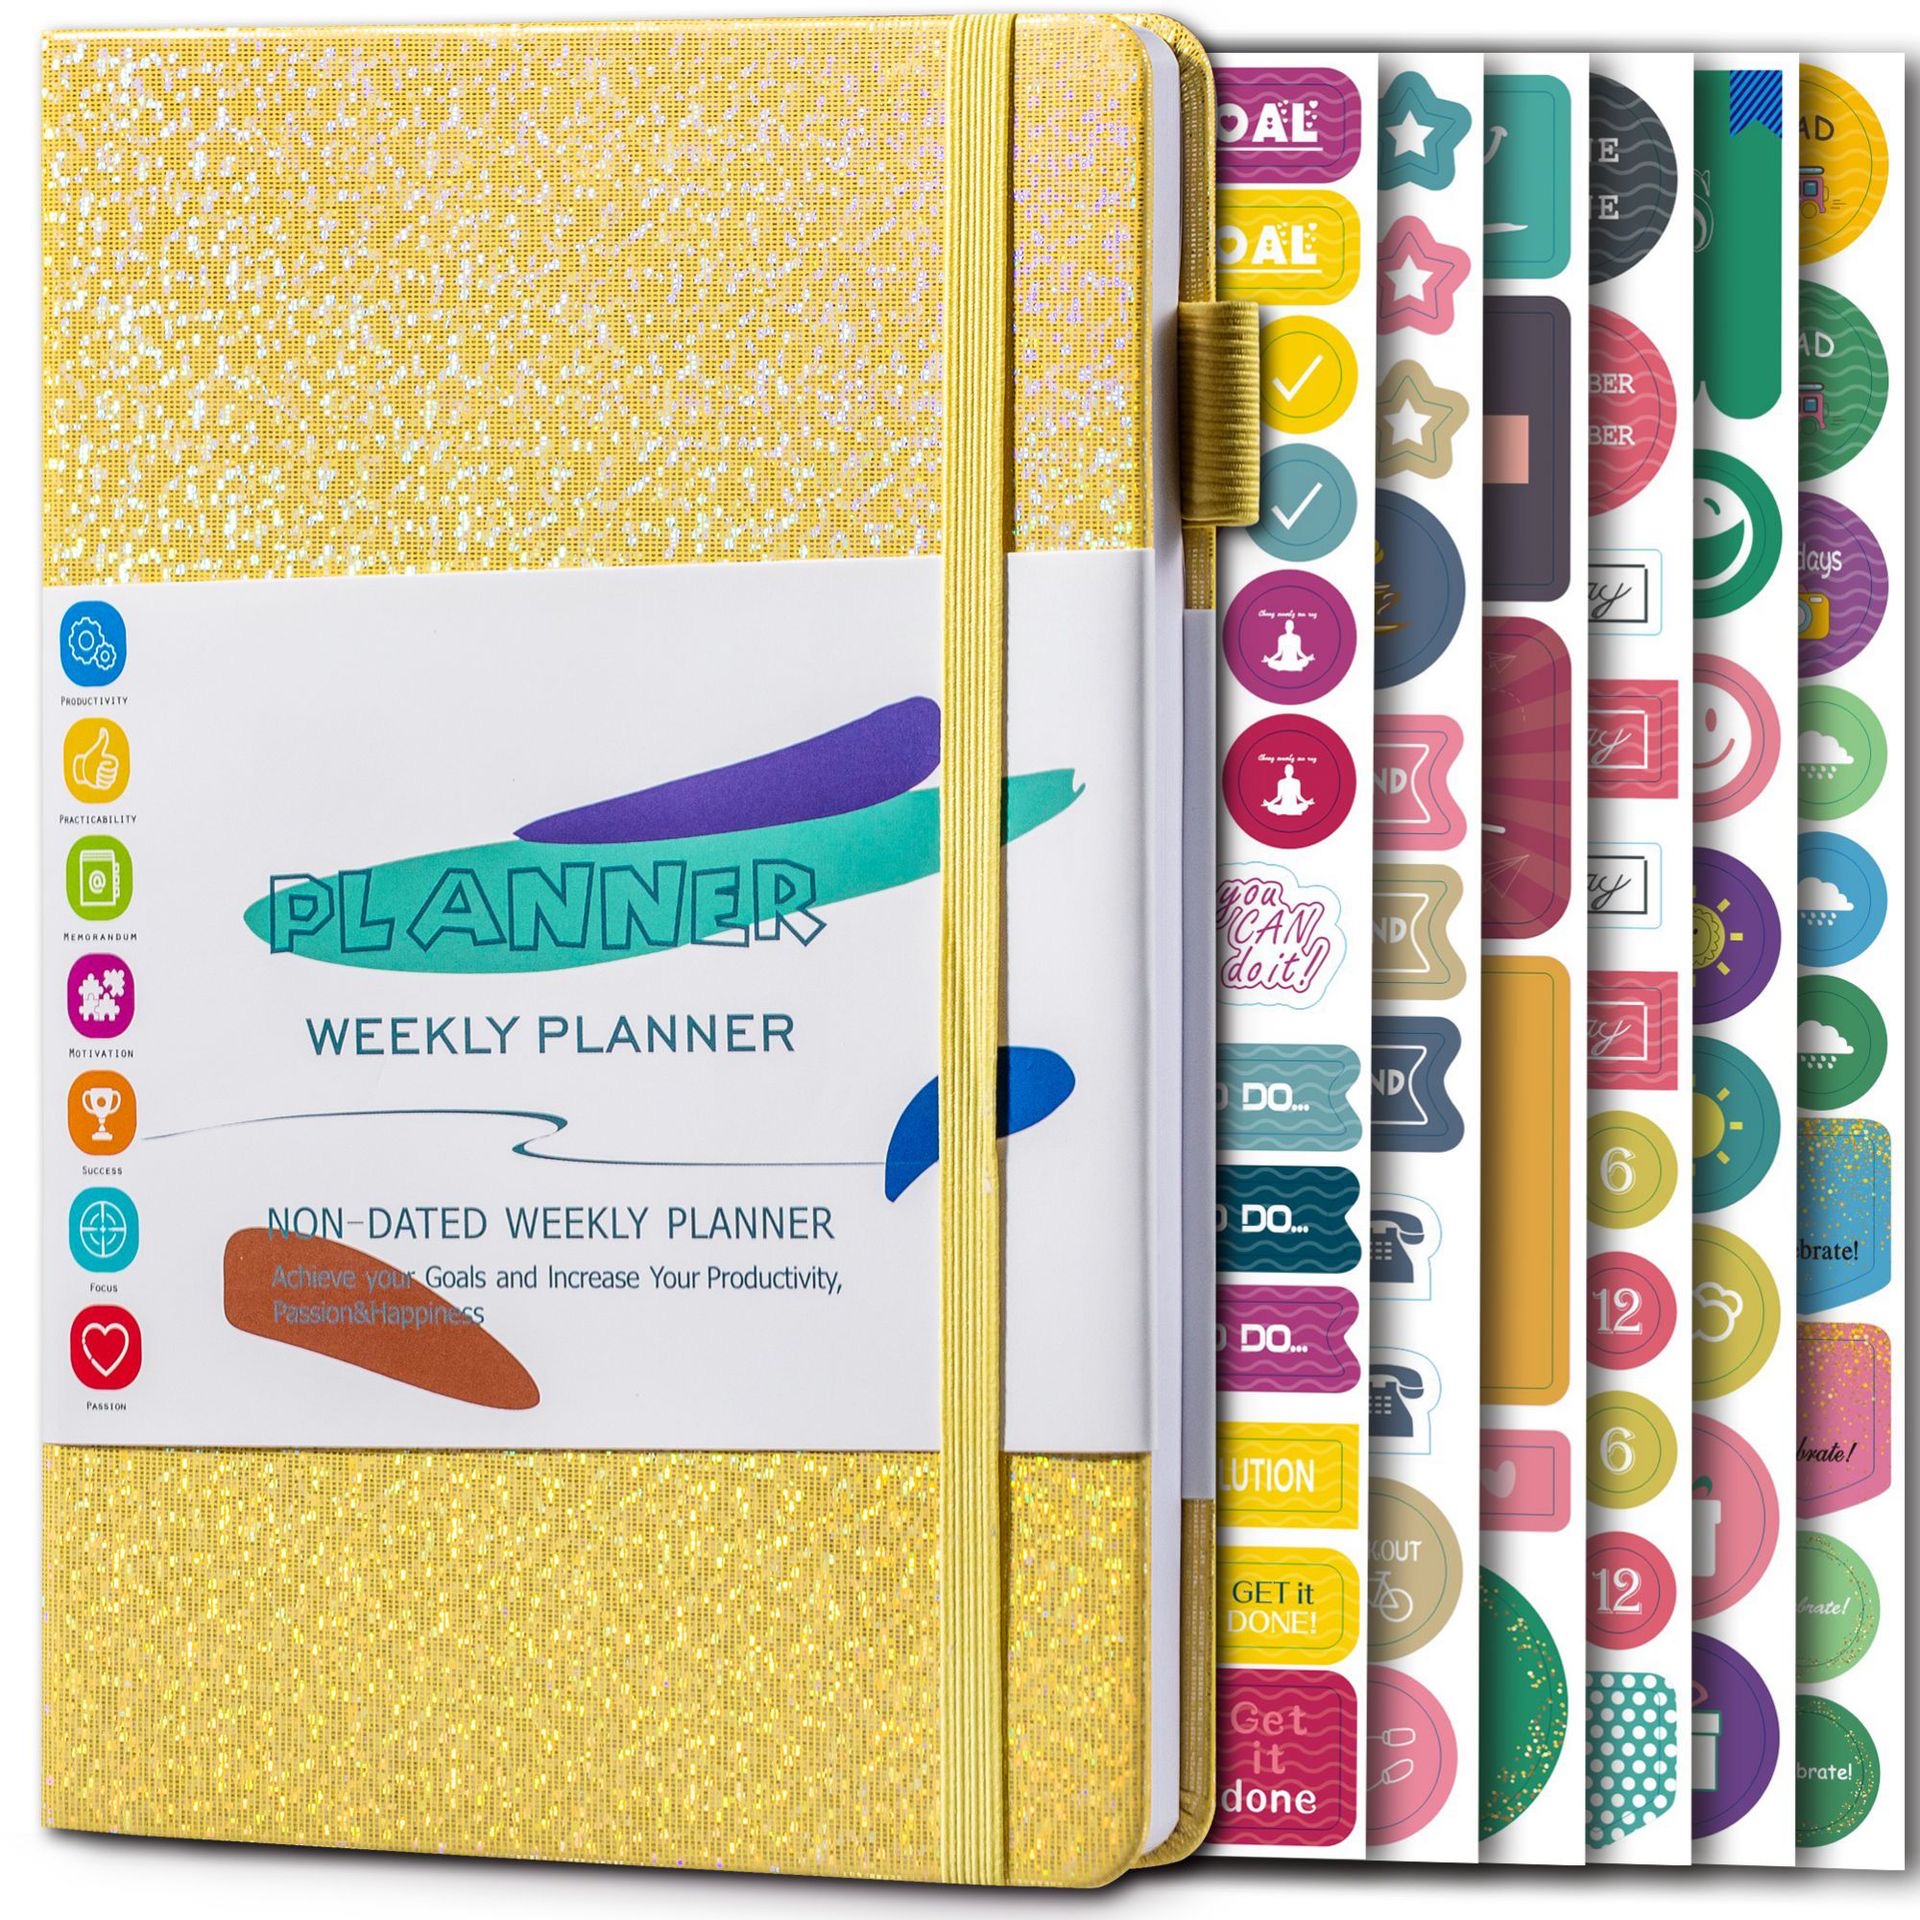 

Weekly Planner Undated Planner Book With To-do List Agenda To Improve Time Management, Productivity And Live Happier, 200 Pages.yellow 6 X 8.4